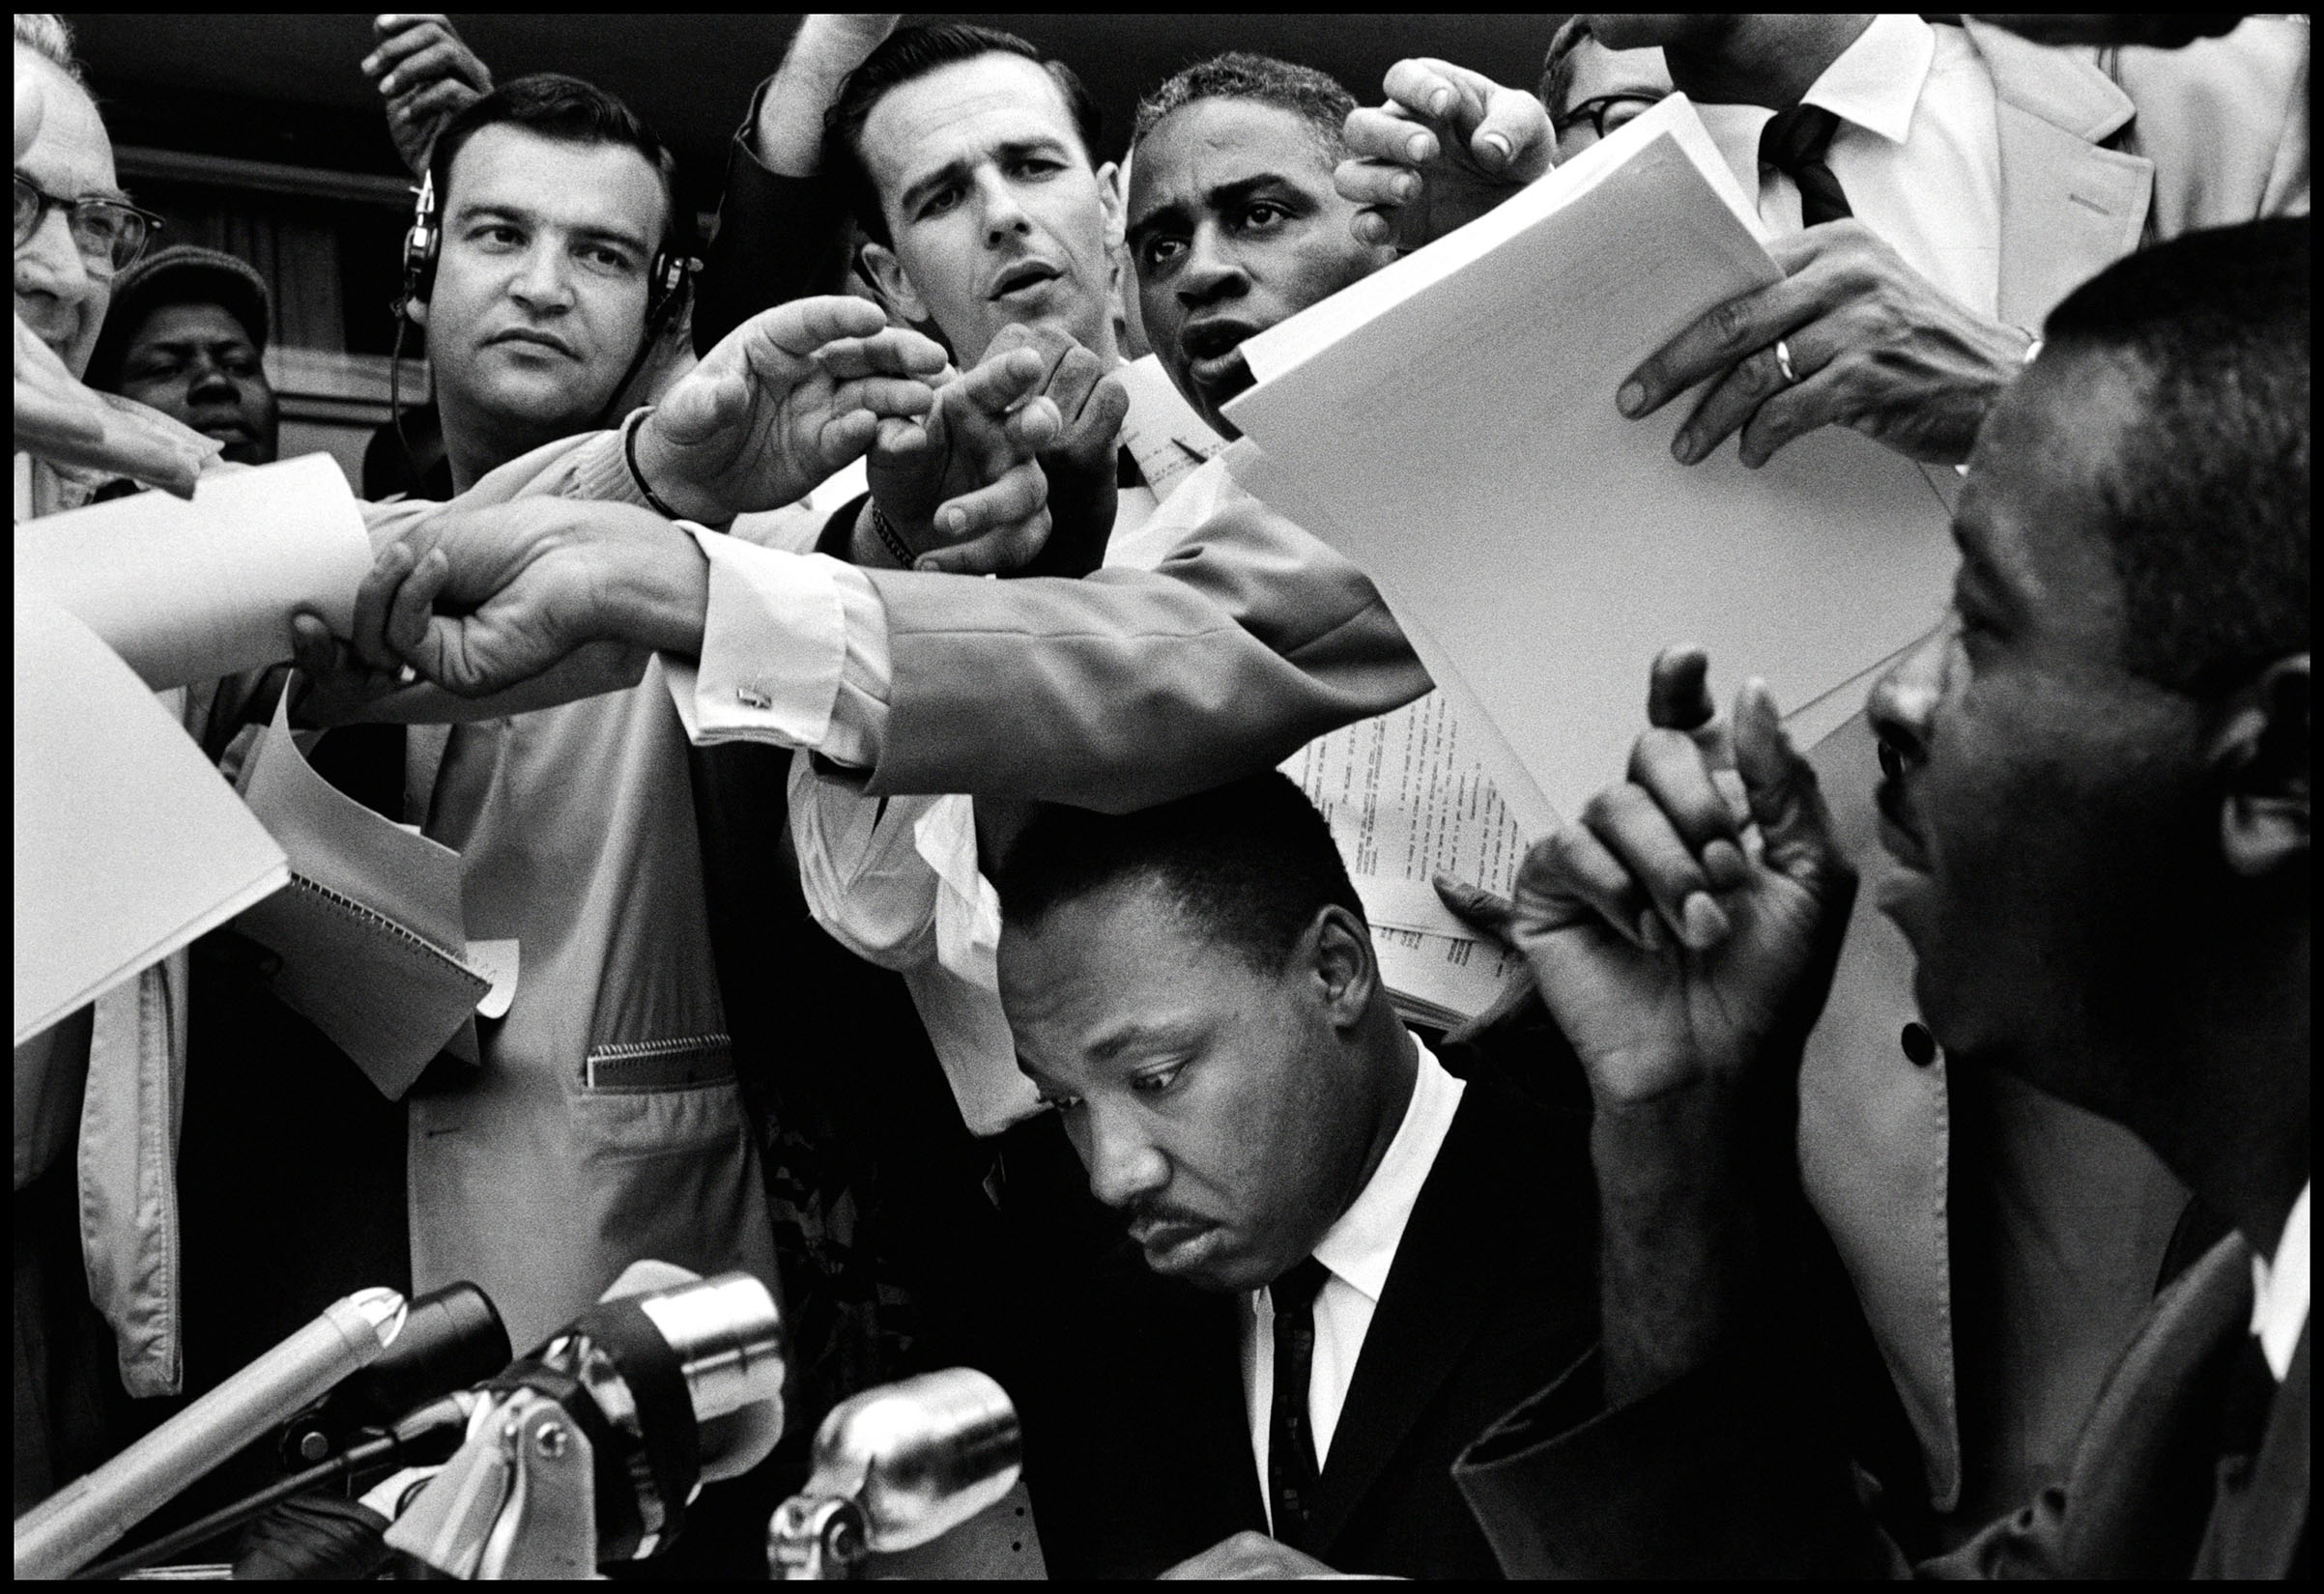 Martin Luther King Jr. attends a press conference in Alabama in 1963 (Bruce Davidson—Magnum Photos)